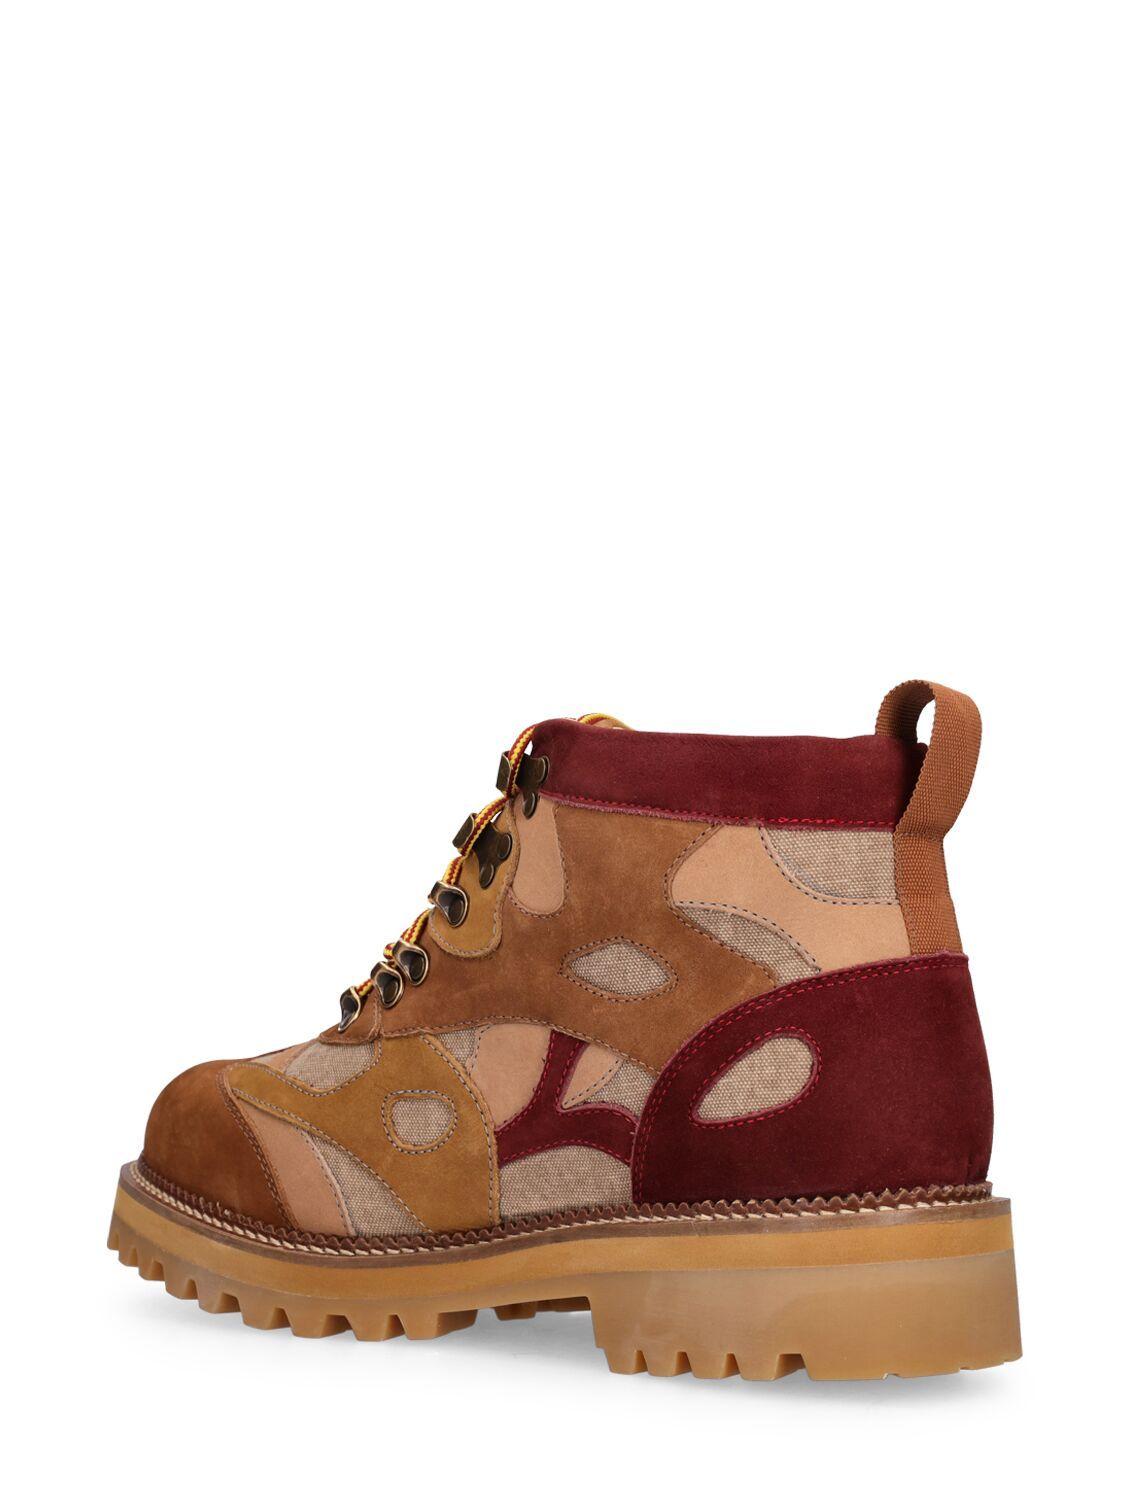 Kidsuper Geometric Suede Boots in Brown for Men